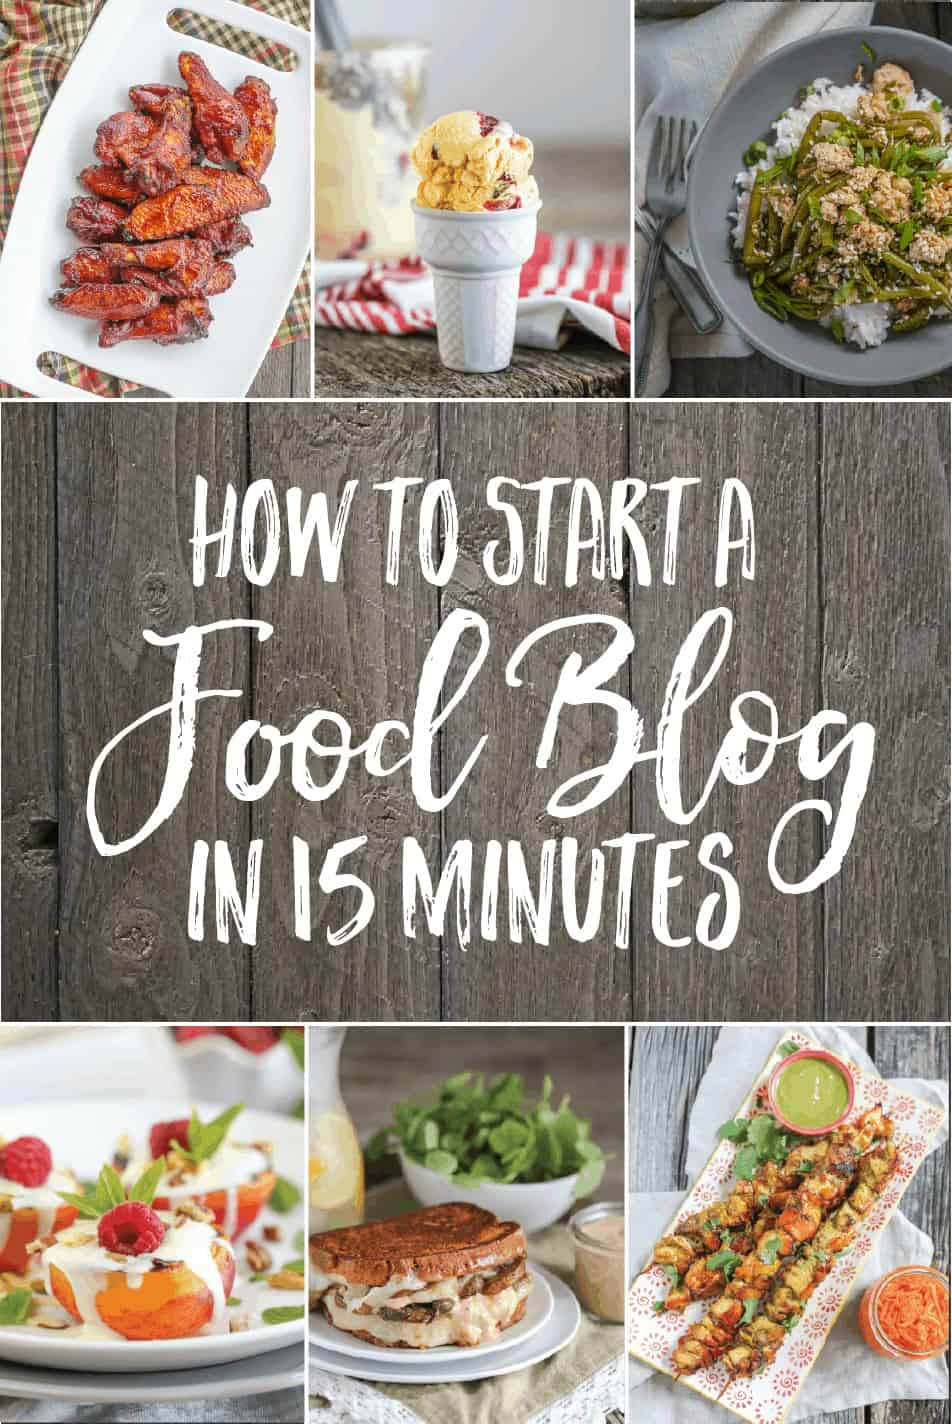 How to Start a Food Blog in 15 minutes!